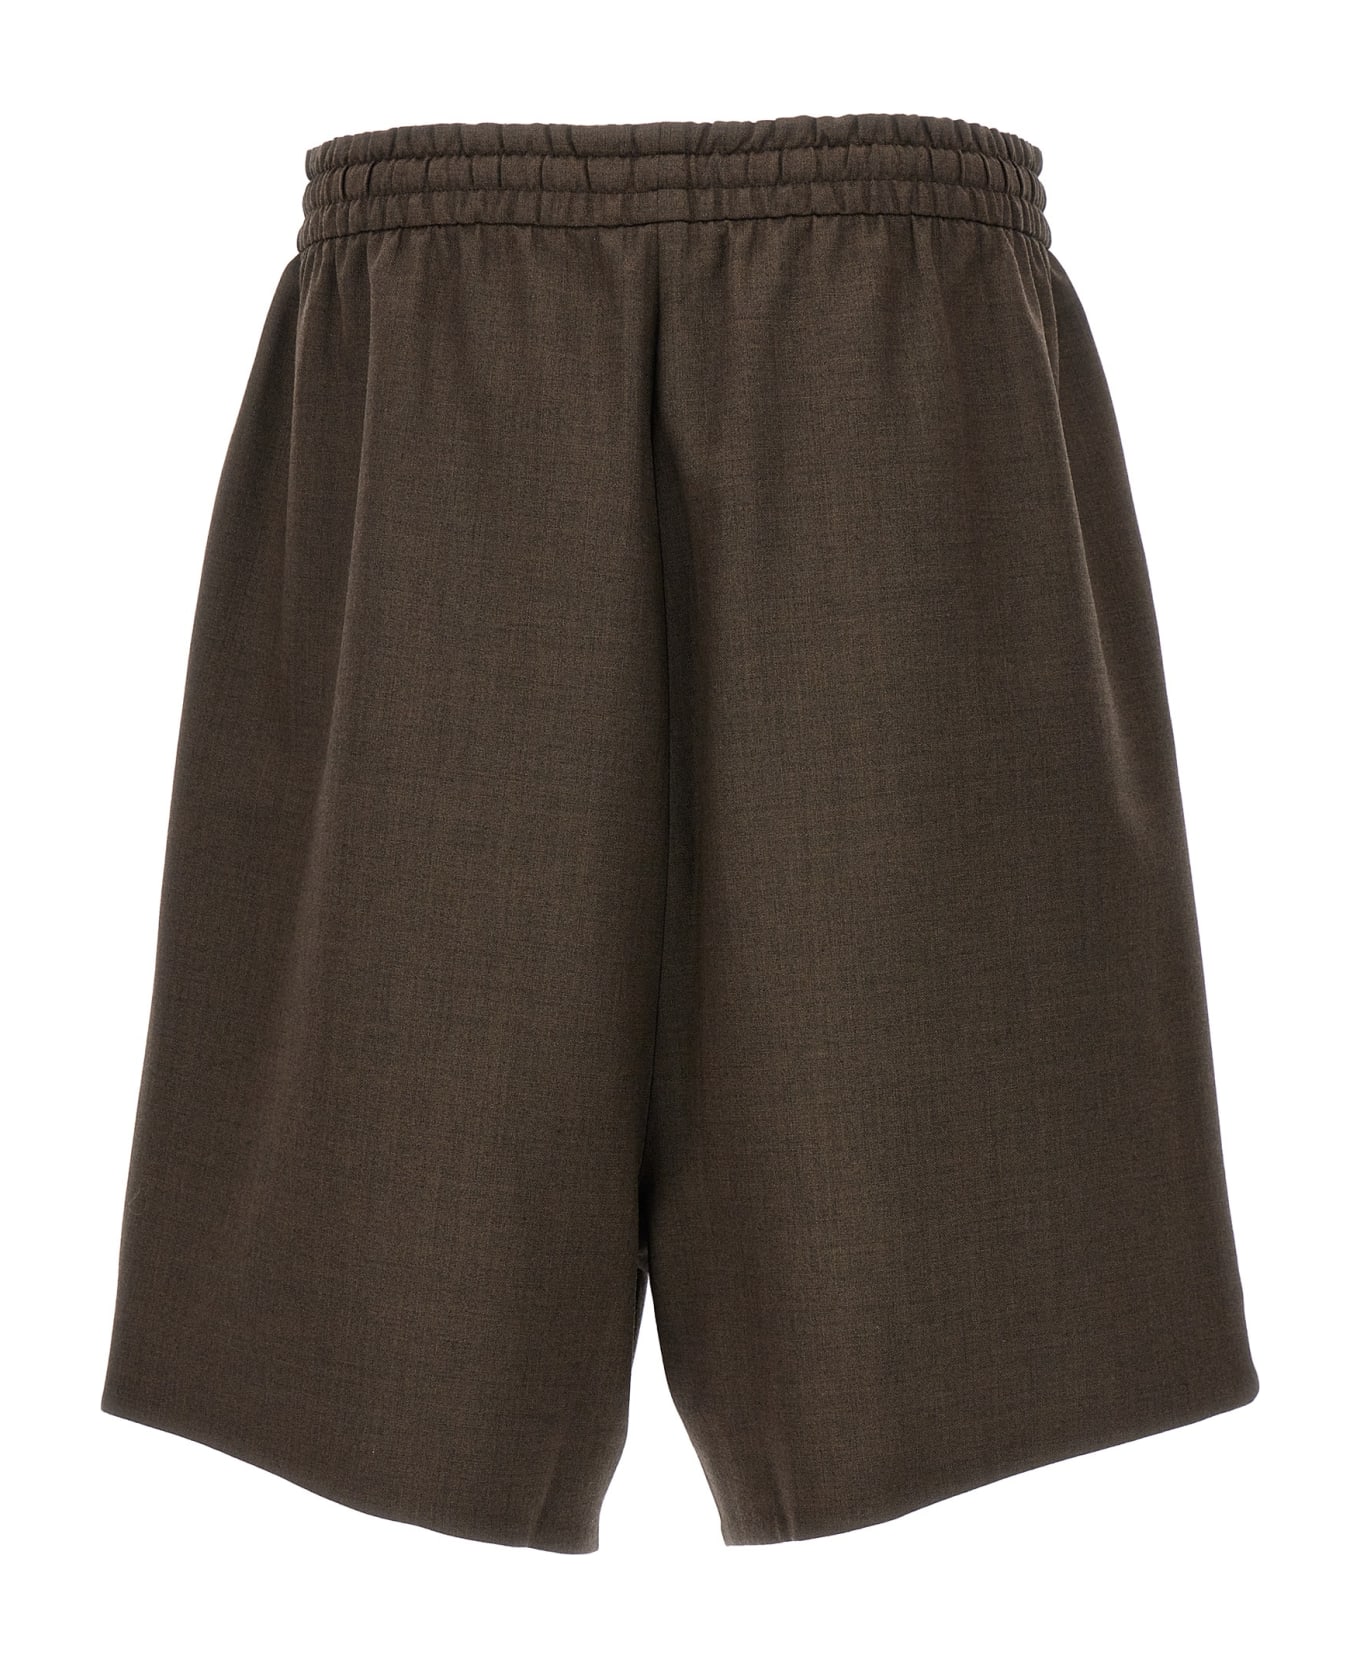 Fear of God 'relaxed' Shorts - Brown